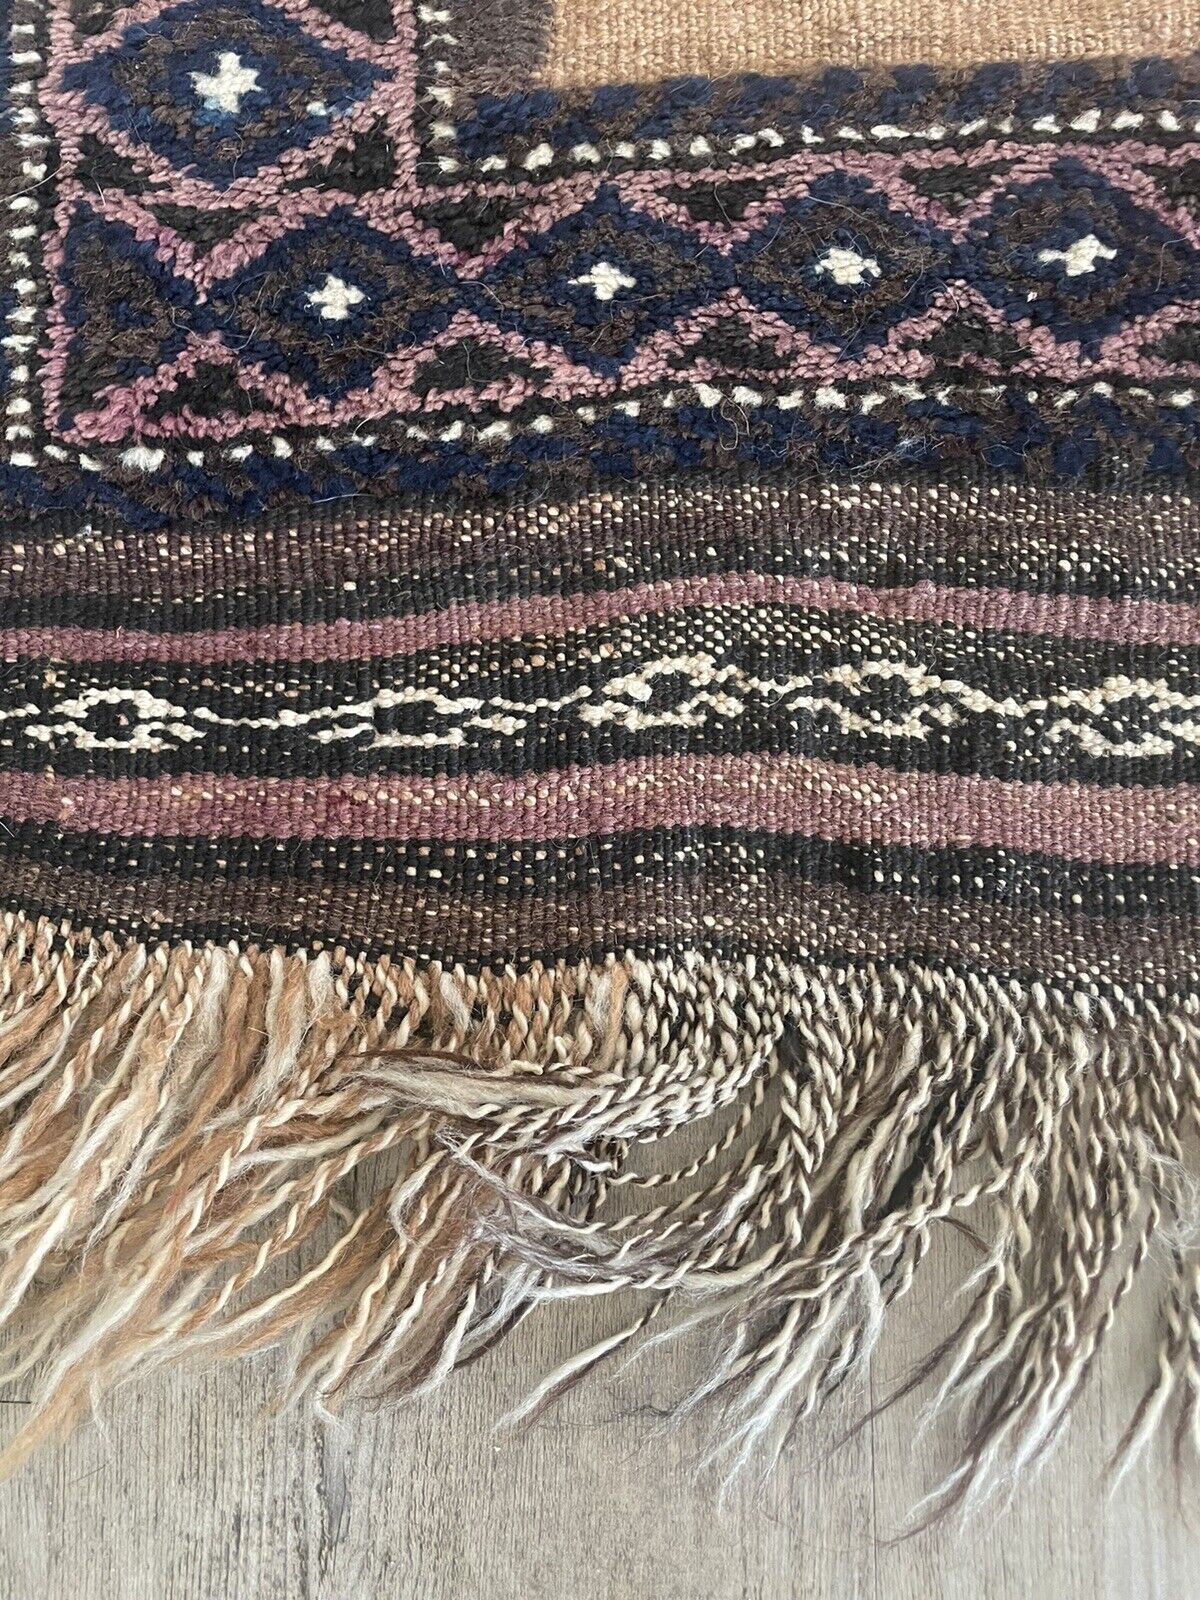 Close-up of craftsmanship on Handmade Antique Afghan Baluch Collectible Rug - Detailed view emphasizing the skillful craftsmanship evident in the rug's design and construction, despite signs of age wear.